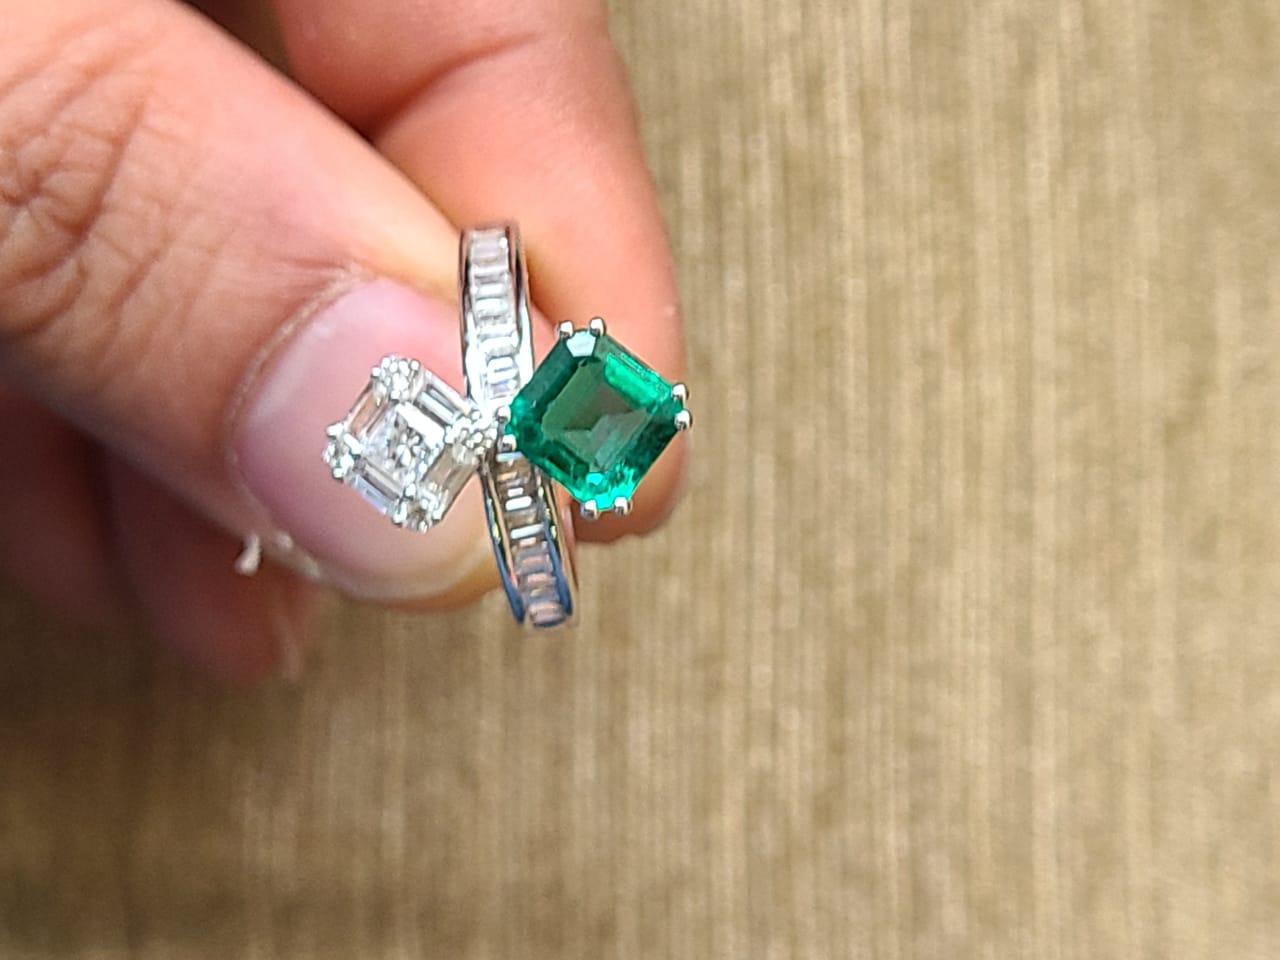 A very beautiful Emerald Engagement Toi et Moi Ring set in 18K White Gold & Diamonds. The weight of the Emerald is 1.28 carats. The Emerald is of very good quality and is of Zambian origin. The Emerald is completely natural, without any treatment.